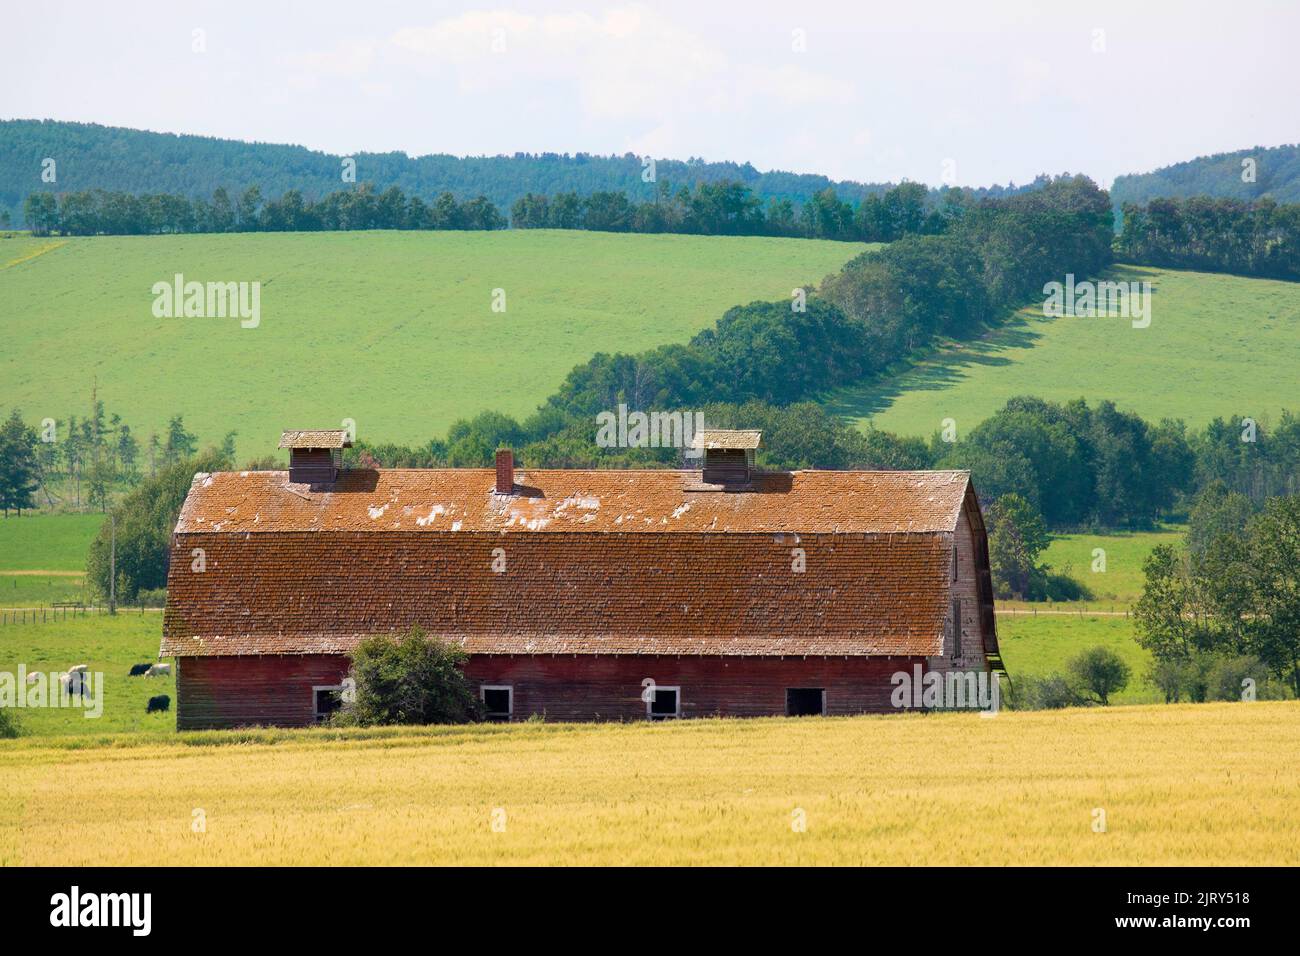 Old barn in a rural farm landscape with farm fields separated by trees in shelterbelts. Central Alberta, Canada Stock Photo